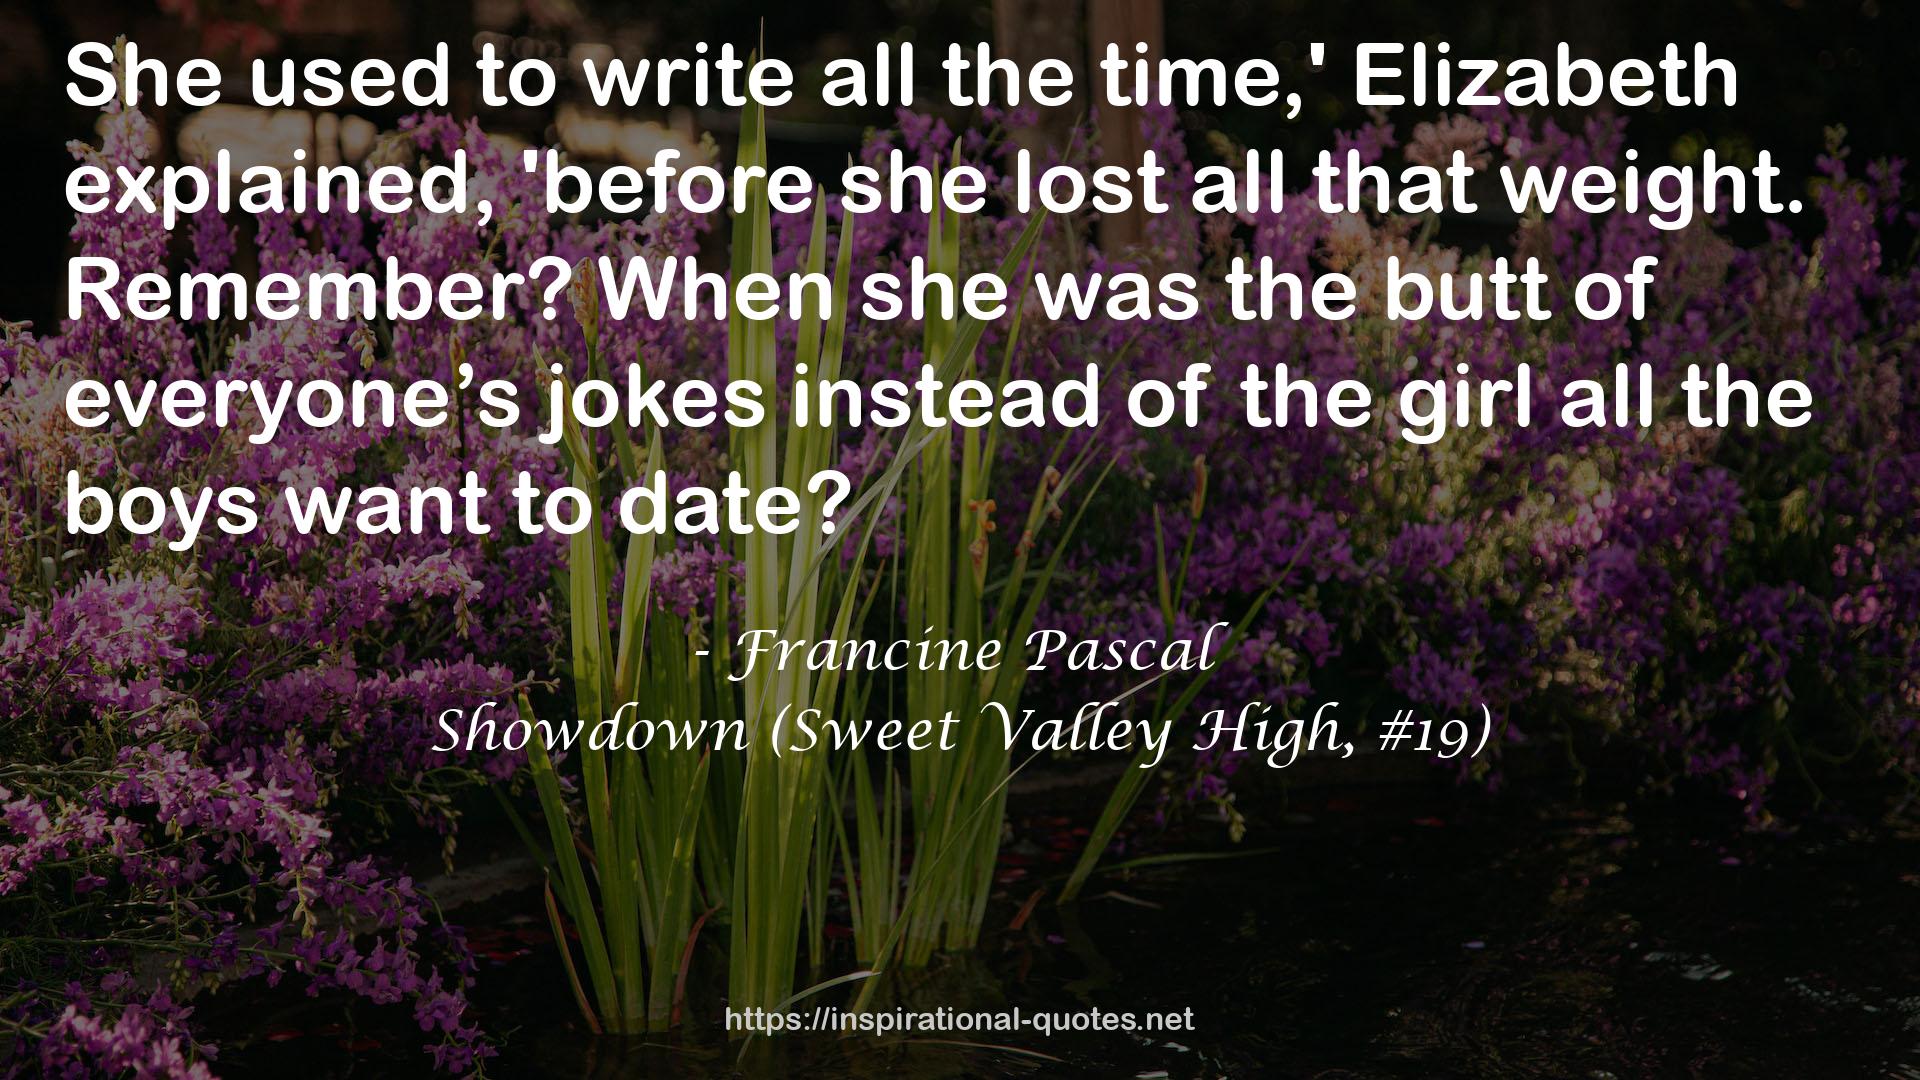 Showdown (Sweet Valley High, #19) QUOTES